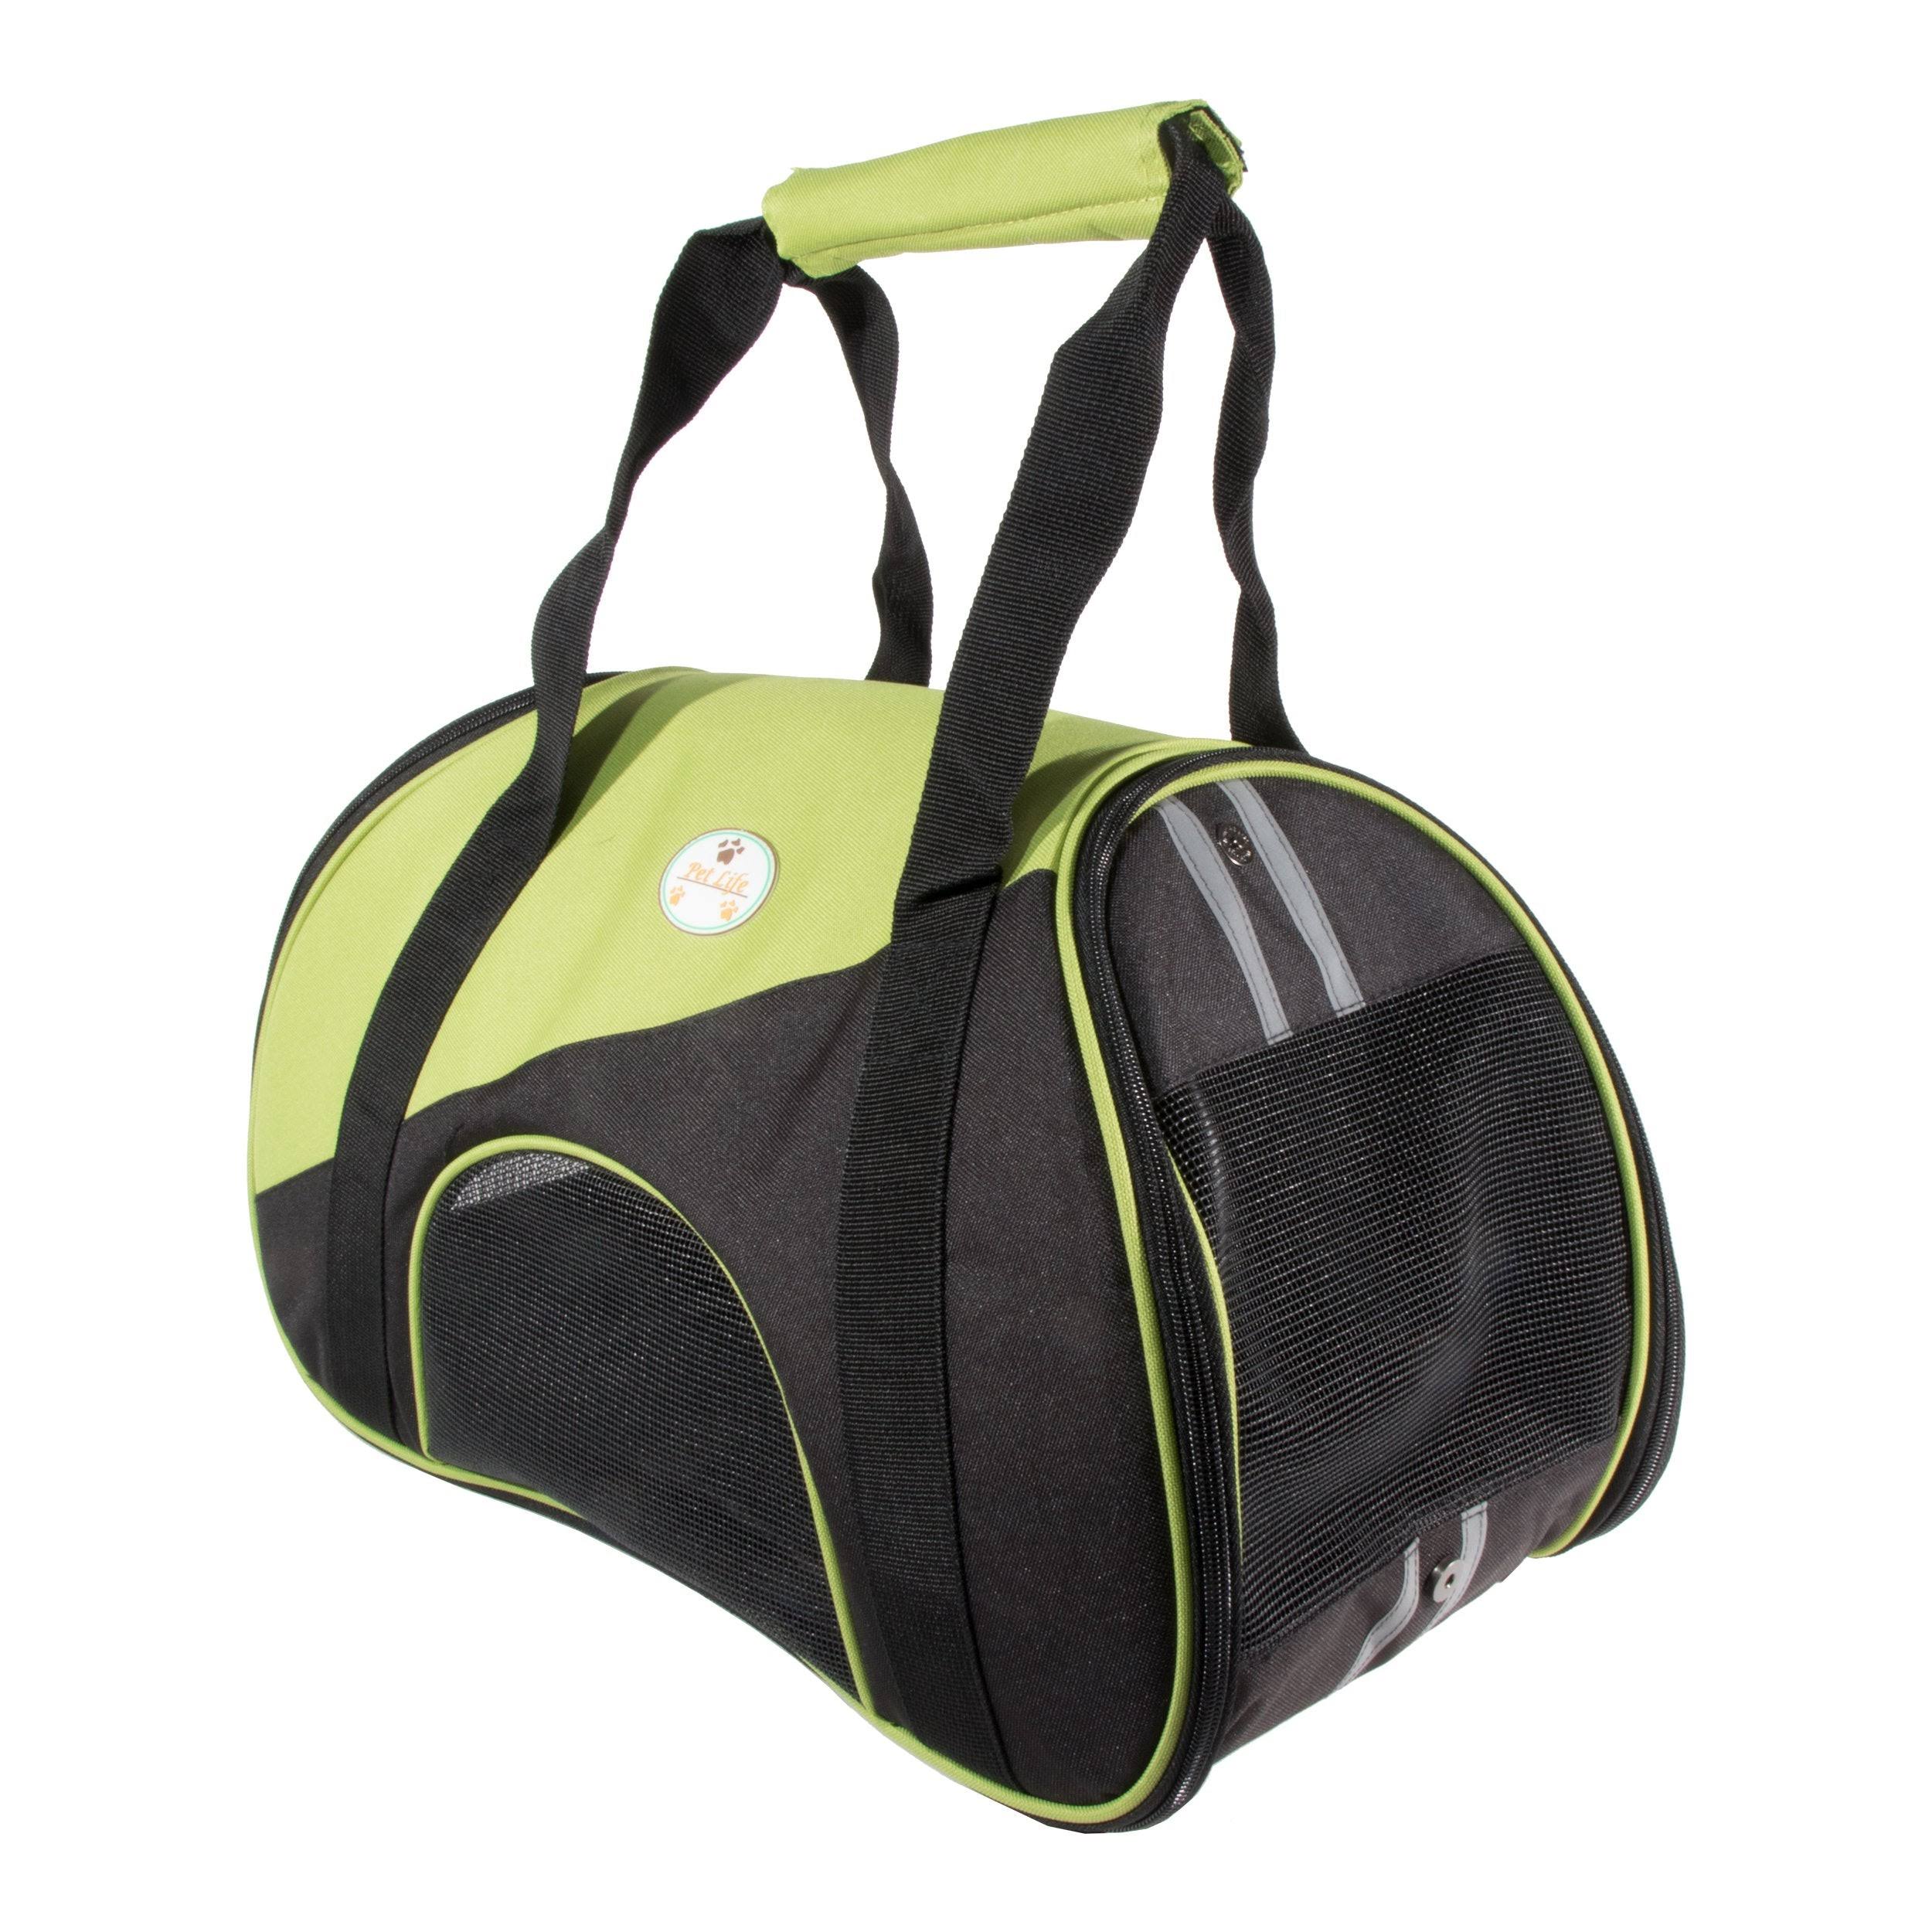 Pet Life B56GNMD Airline Approved Zip-N-Go Contoured Pet Carrier Green - Medium